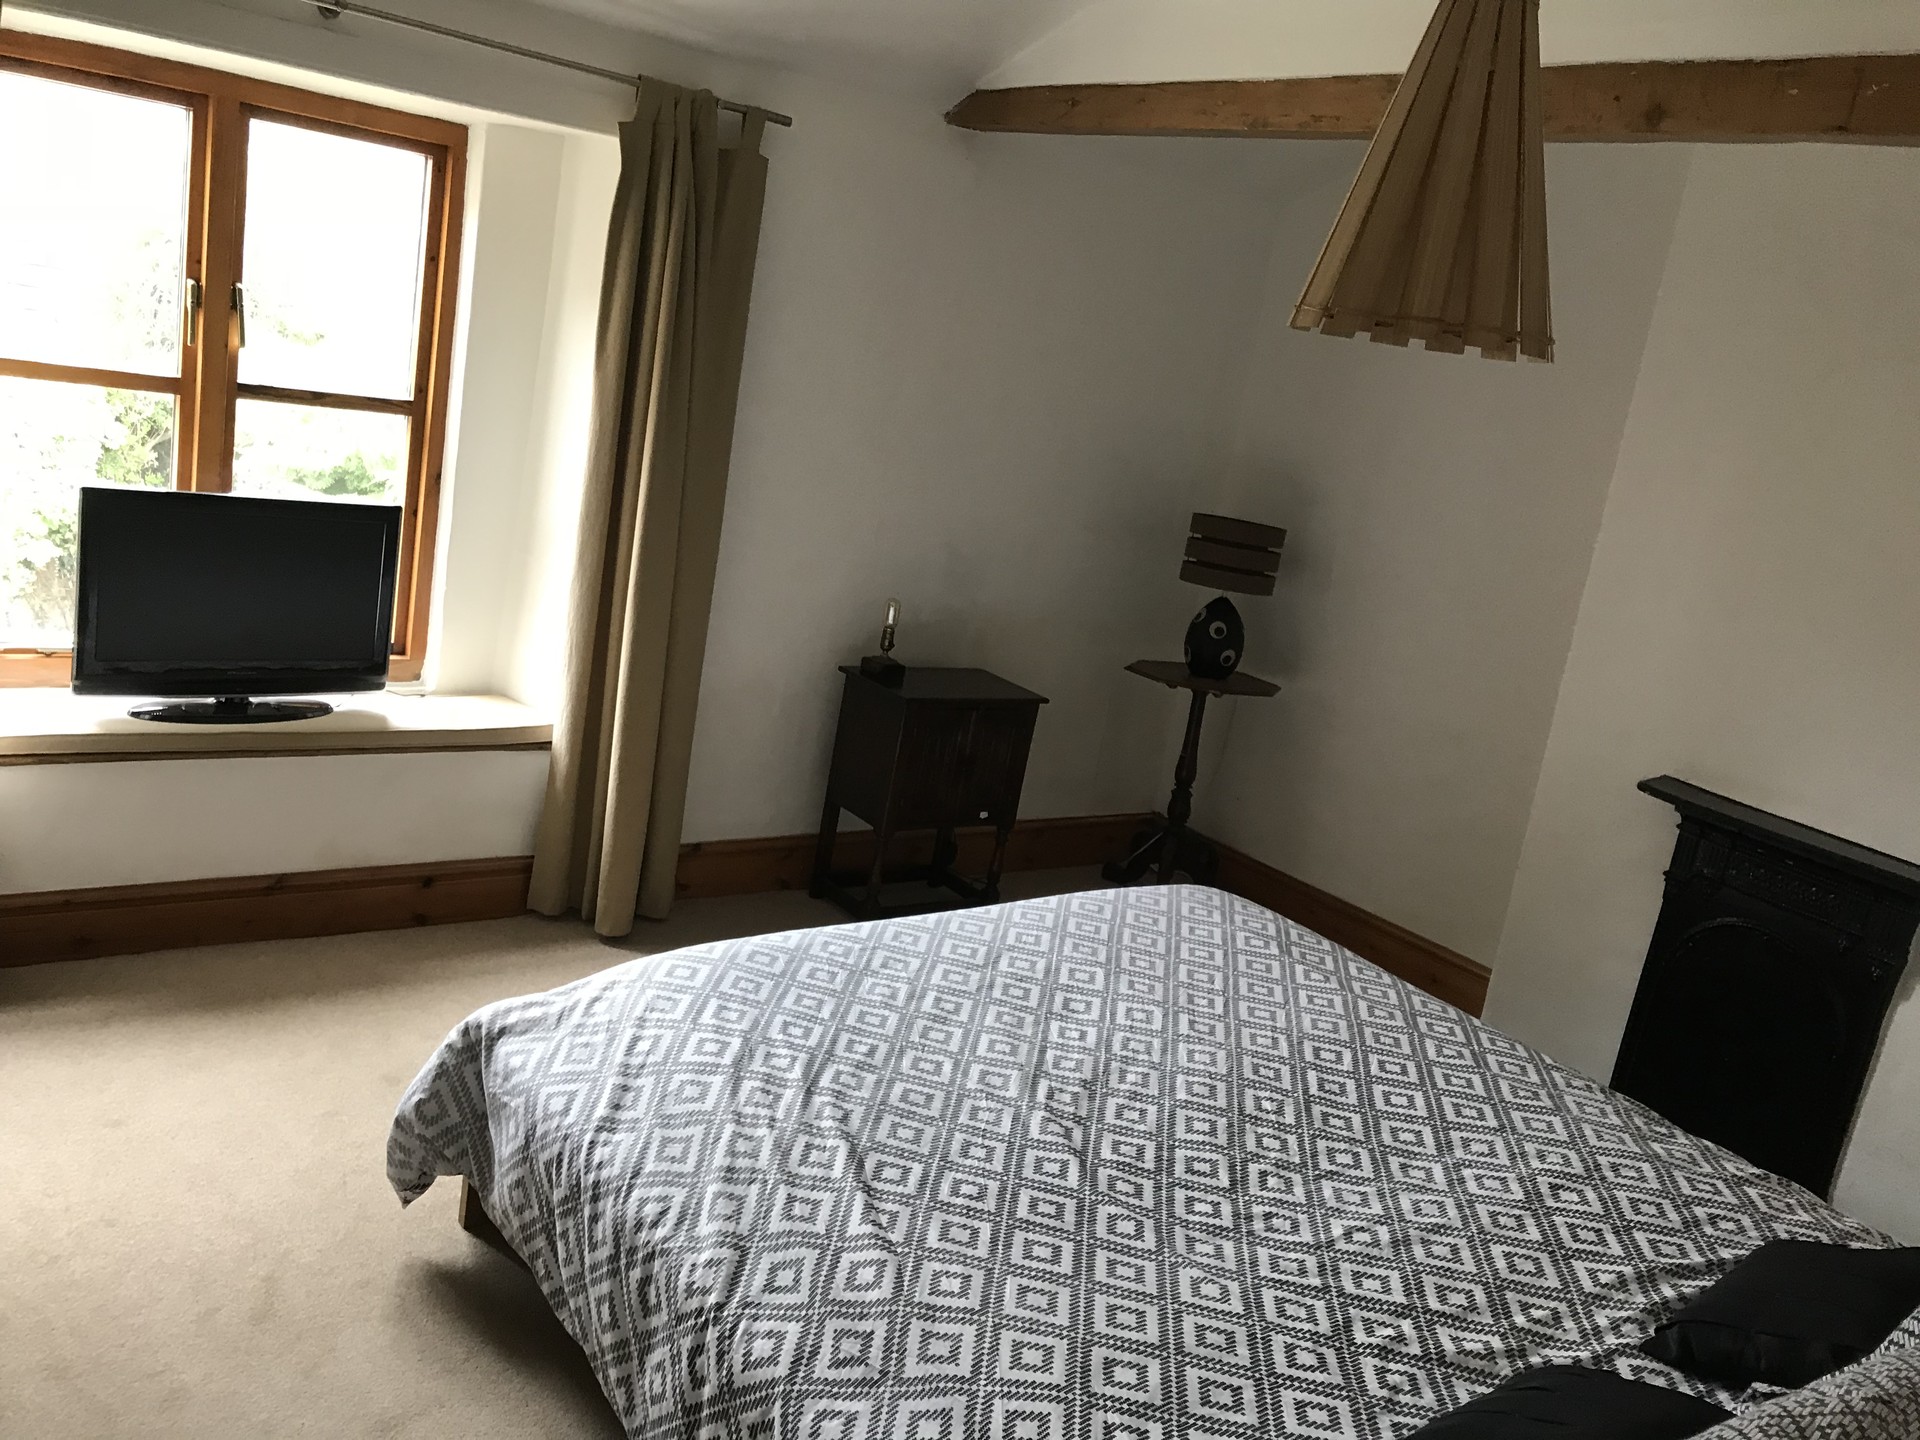 Large Double Fully Furnished Cottage Bedroom Room For Rent Wakefield